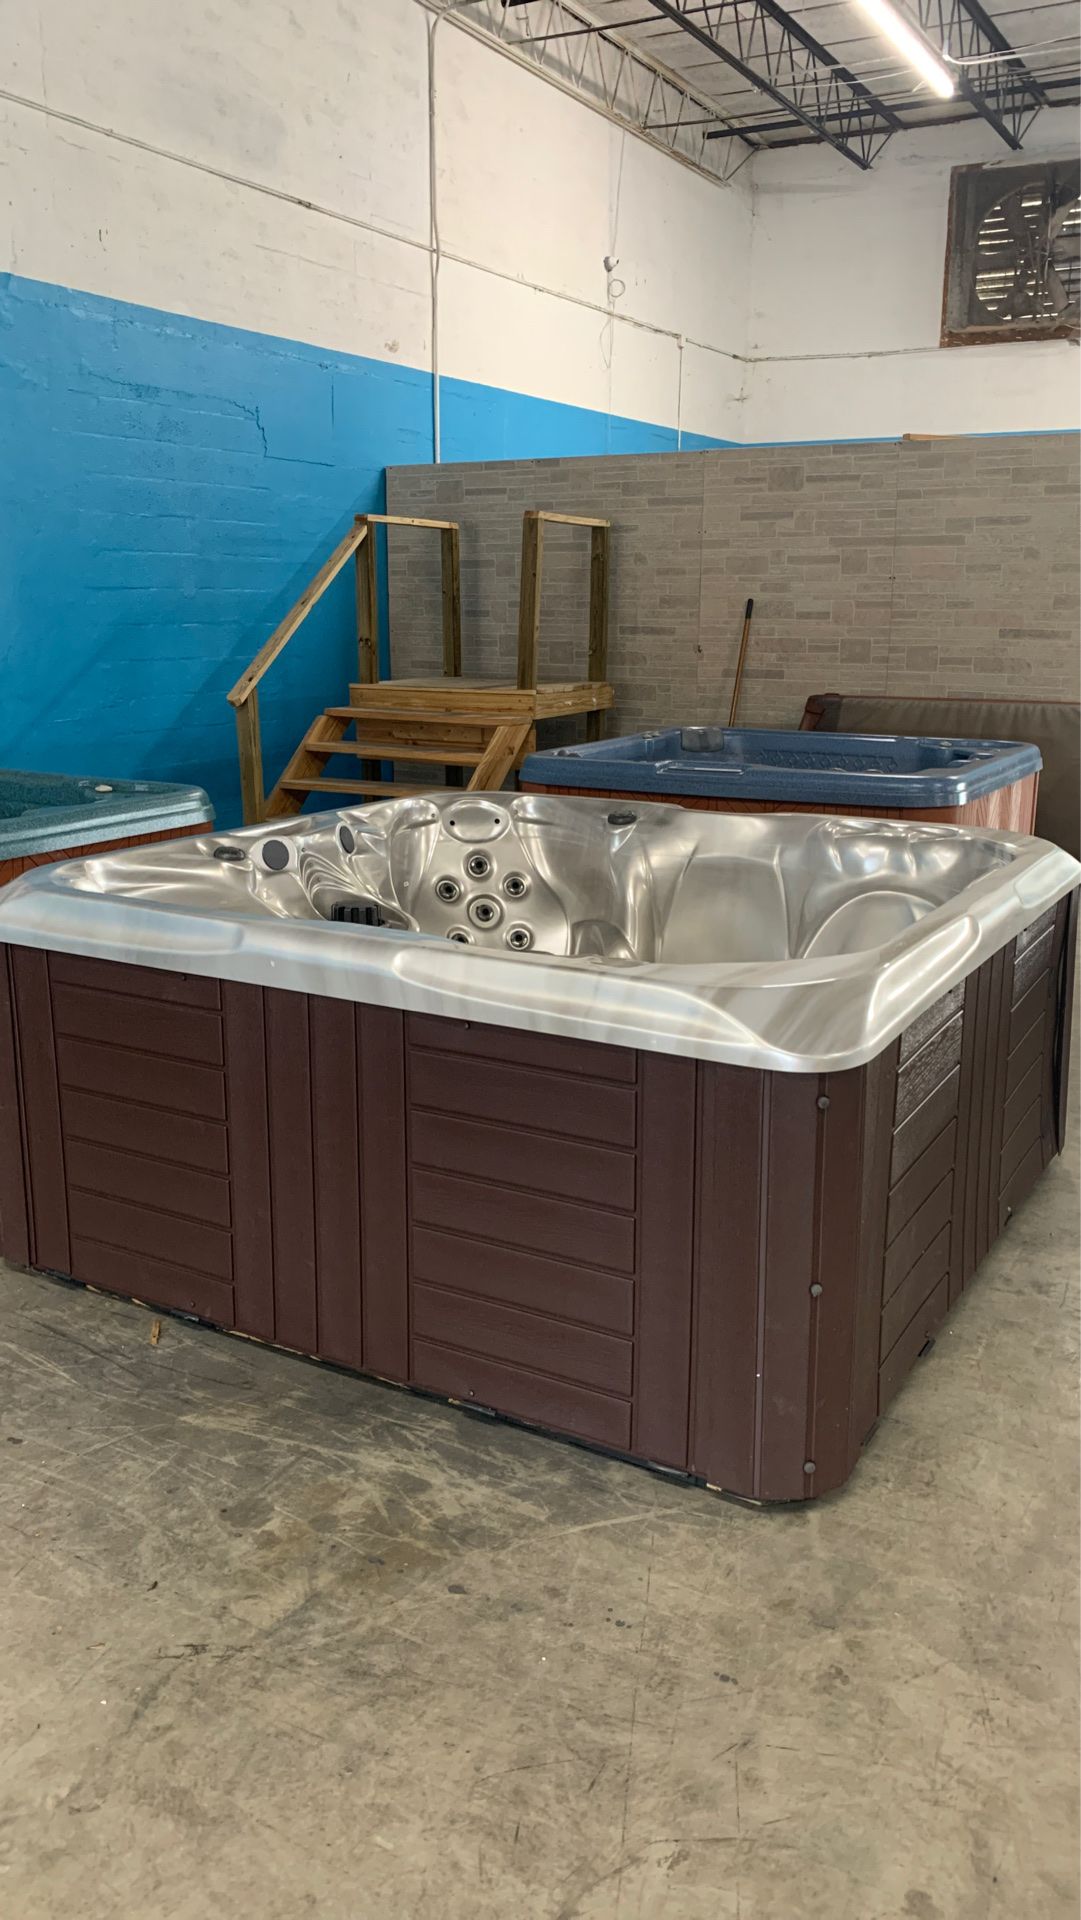 Preowned Master spa ready for immediate delivery!